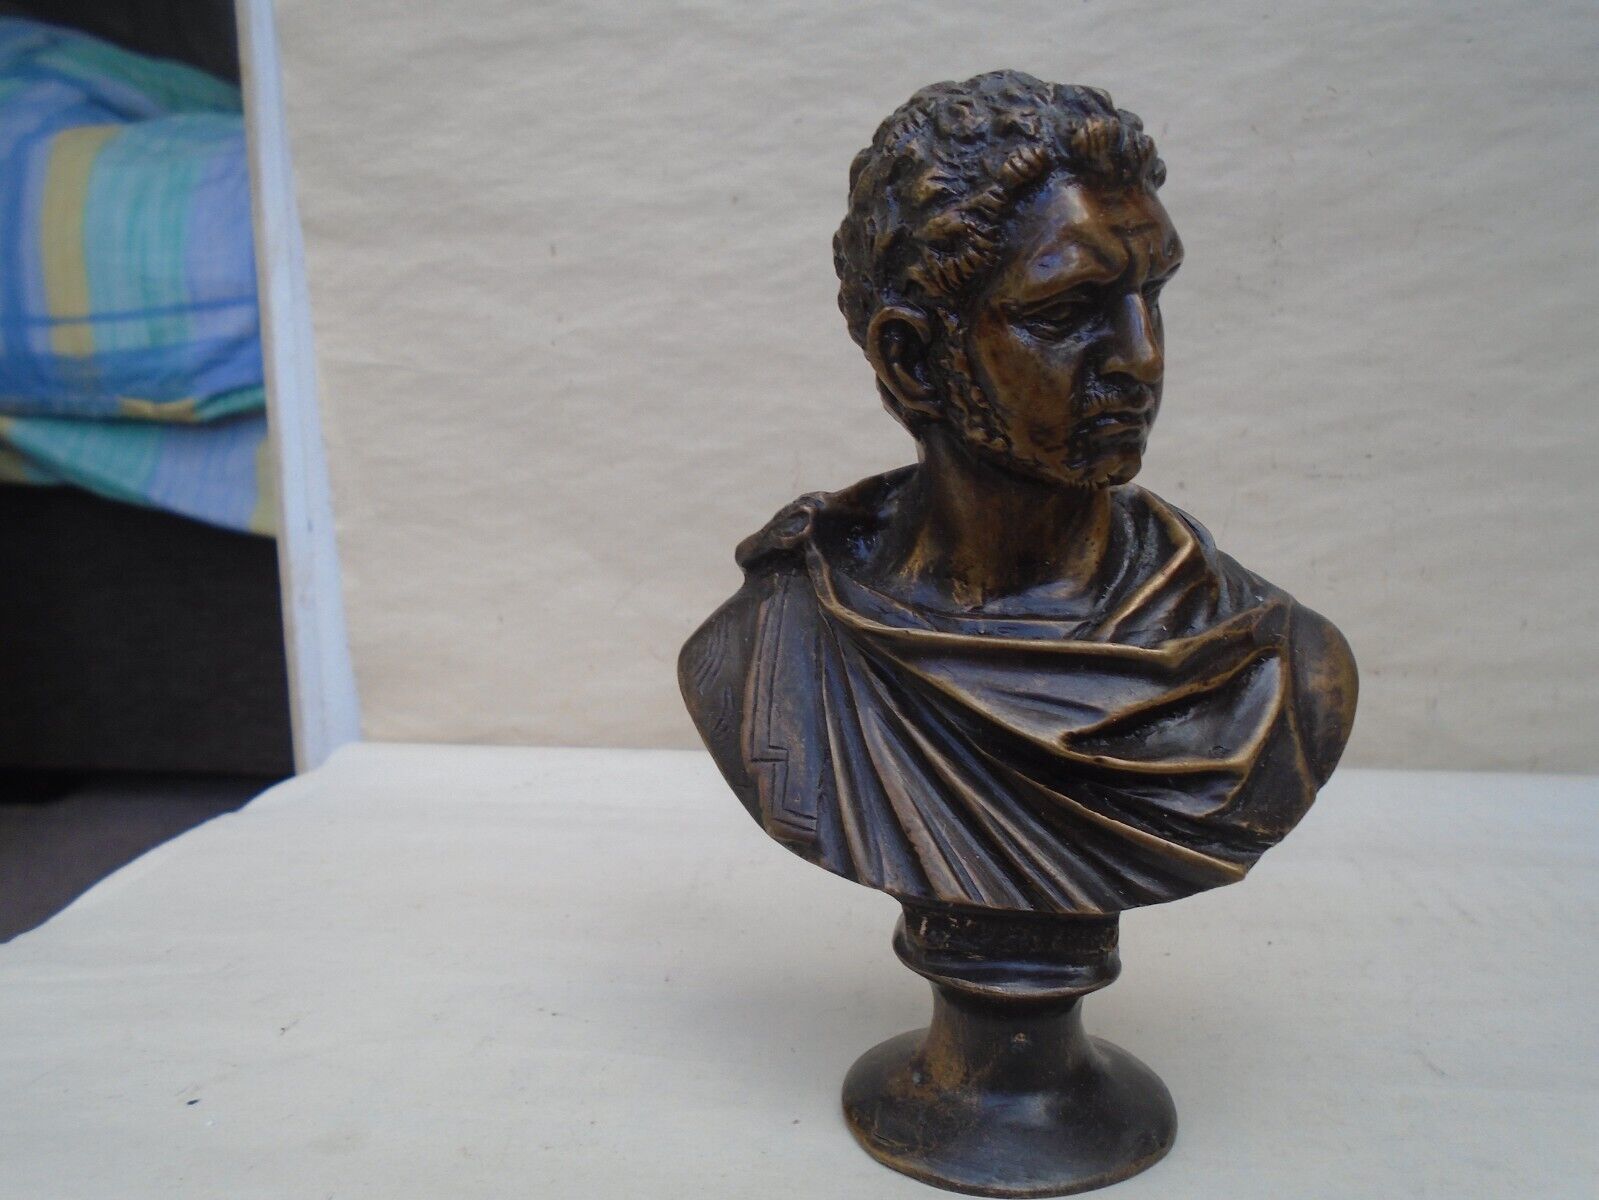 Curious old bronze metal bust of a man wearing toga  NICE CLASSICAL BUST  look